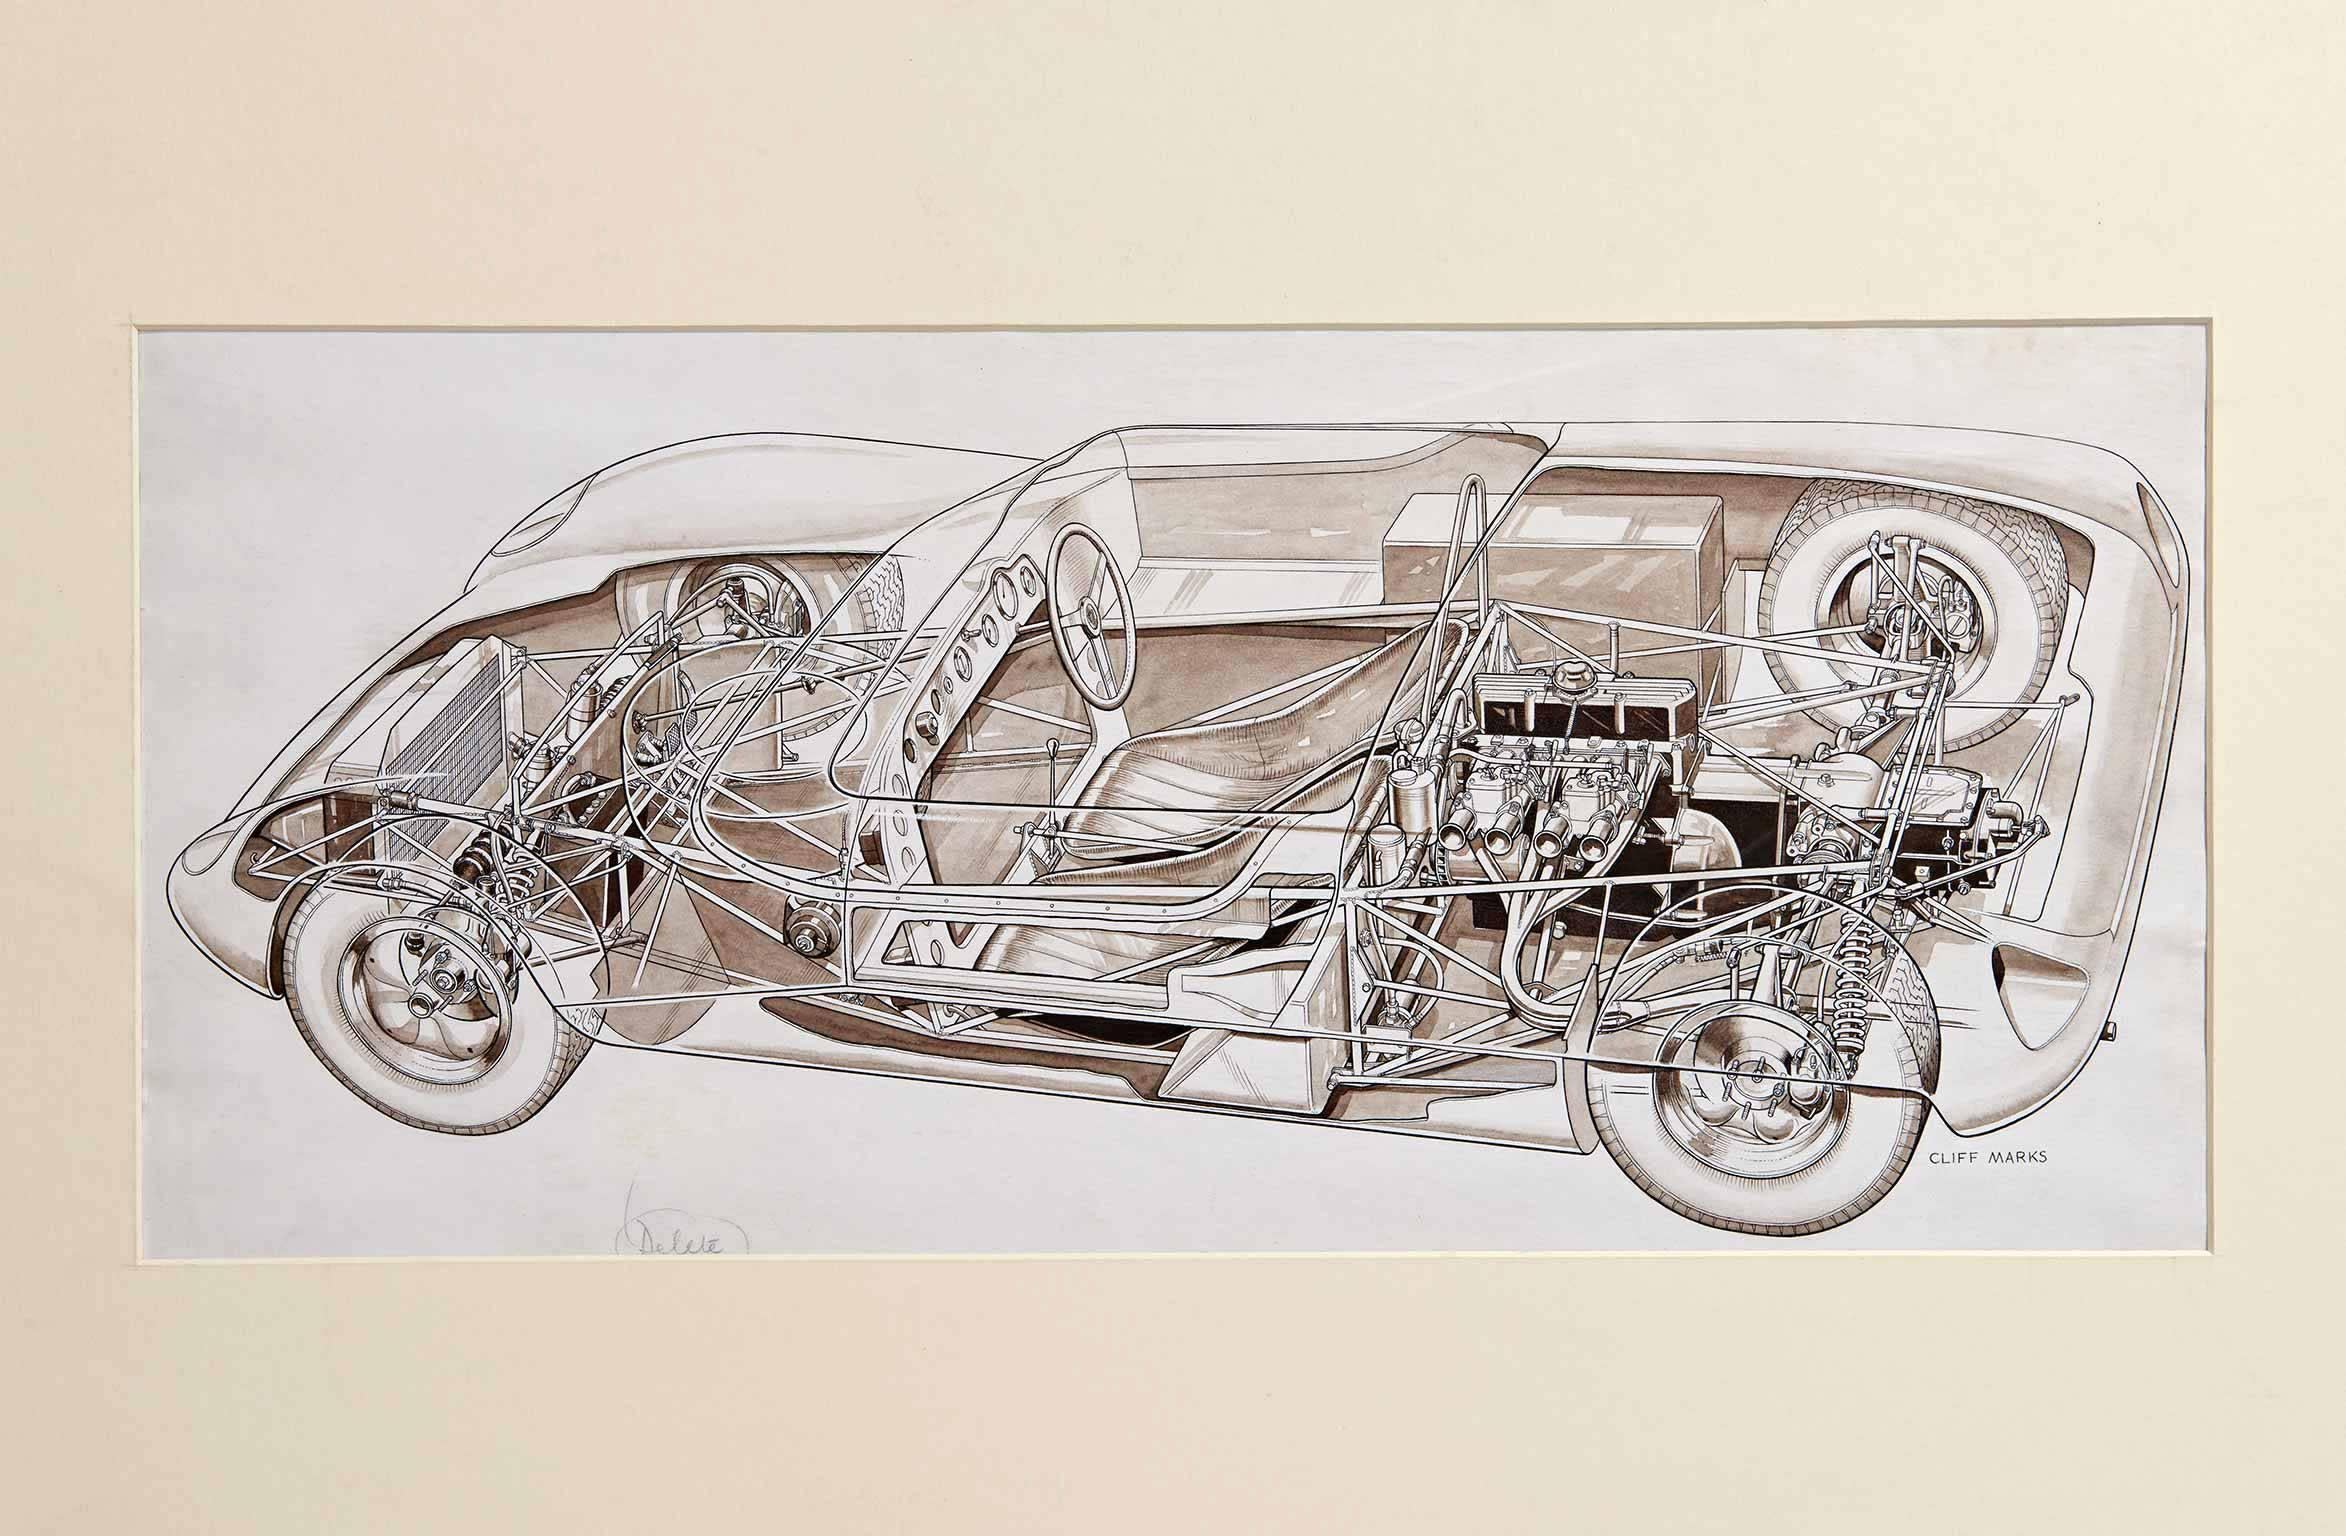 This beautiful pen and ink "cutaway" drawing of the Lotus 23 sports racing car is the actual, original artwork by Cliff Marks that was published in the venerable British car magazine, The Motor, in 1962, after the car was introduced at the